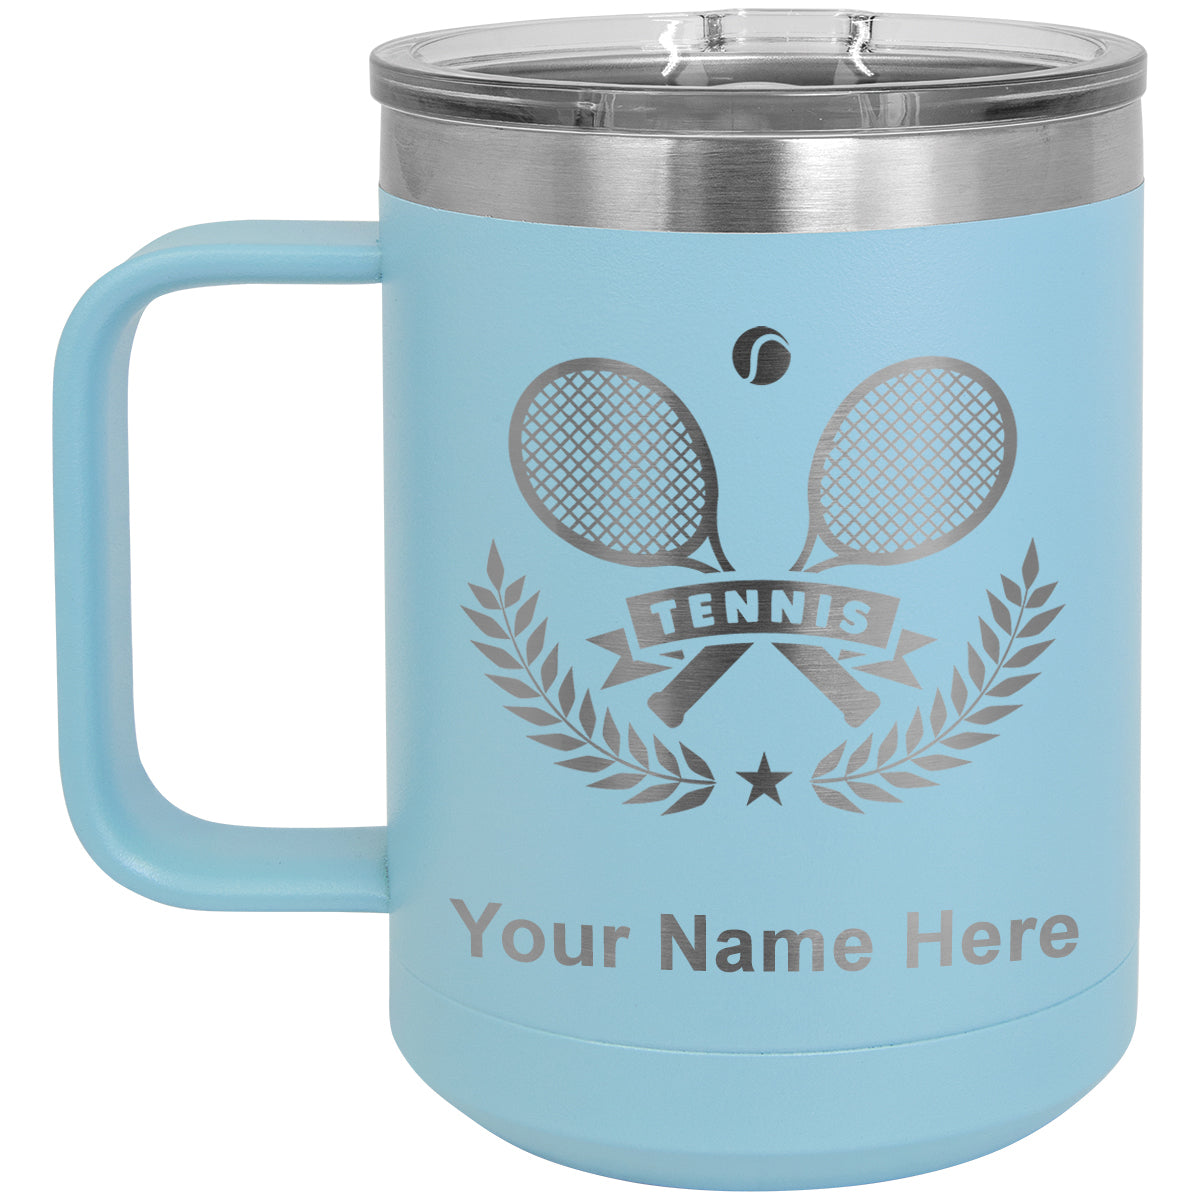 15oz Vacuum Insulated Coffee Mug, Tennis Rackets, Personalized Engraving Included